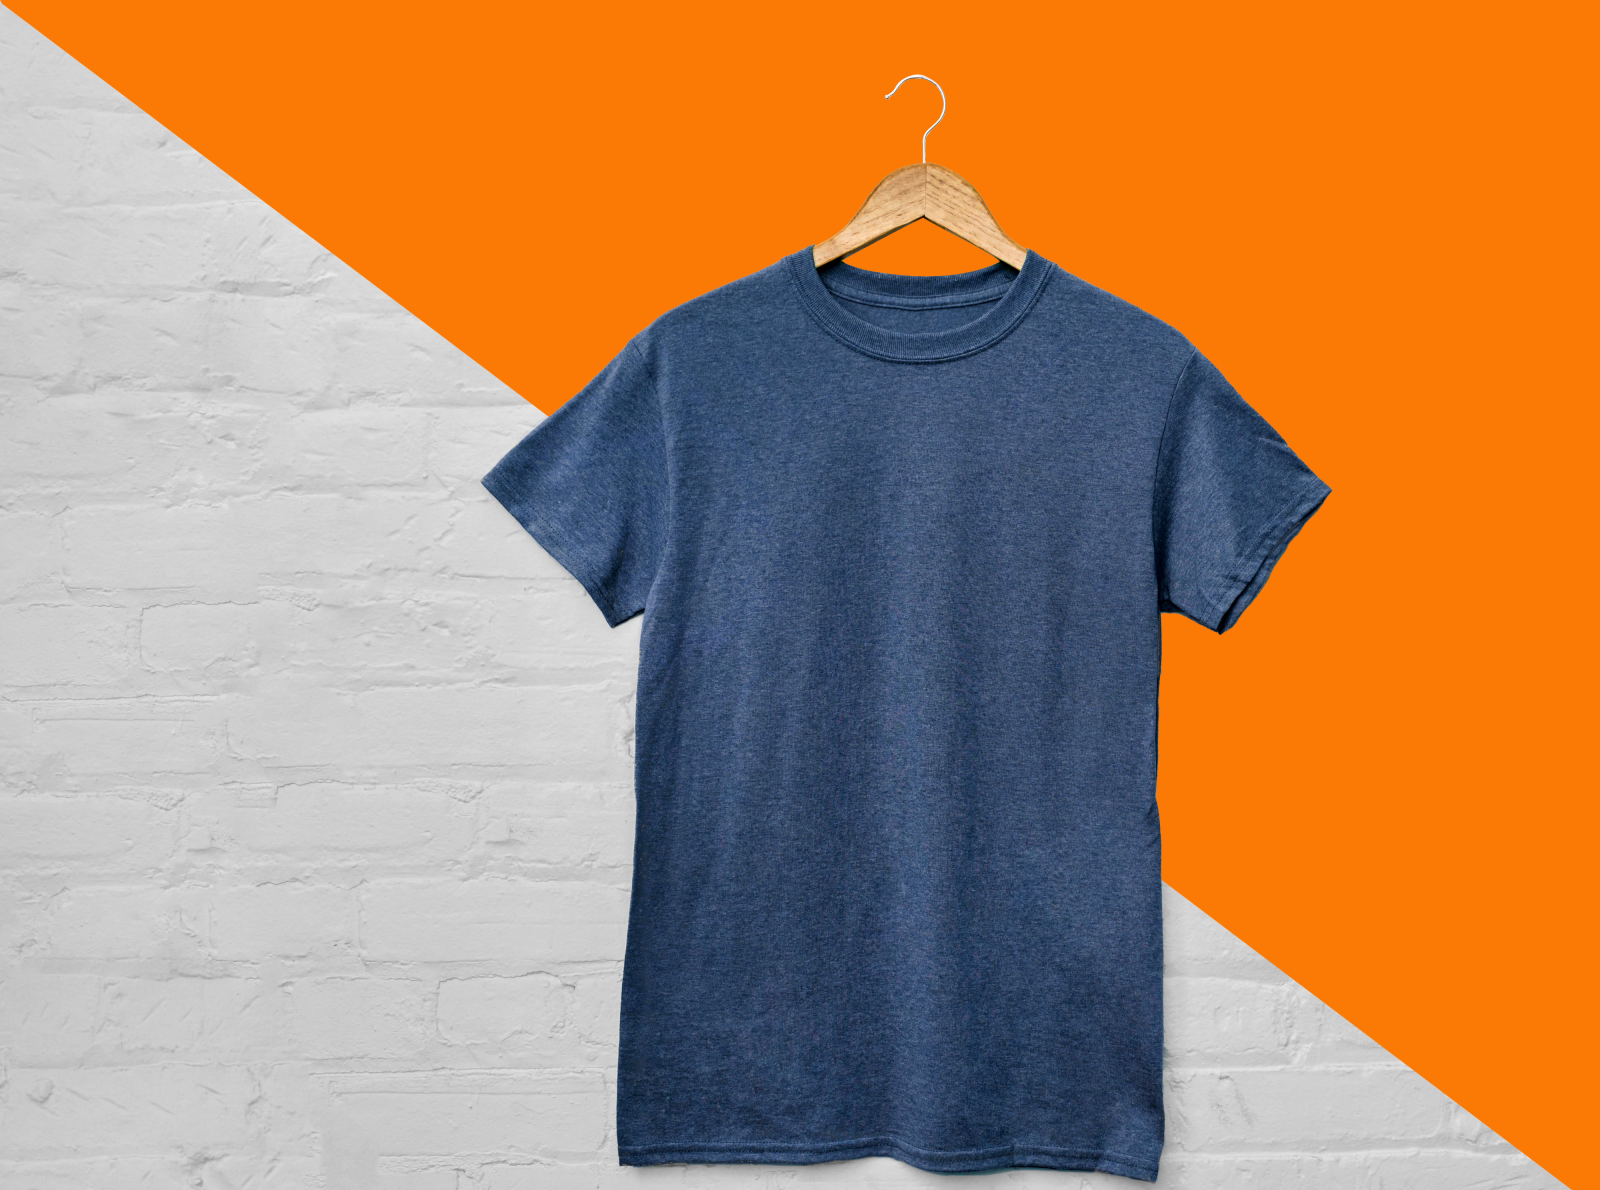 Blue T Shirt Product Background Remove by clipping path by Abdur Rahman ...